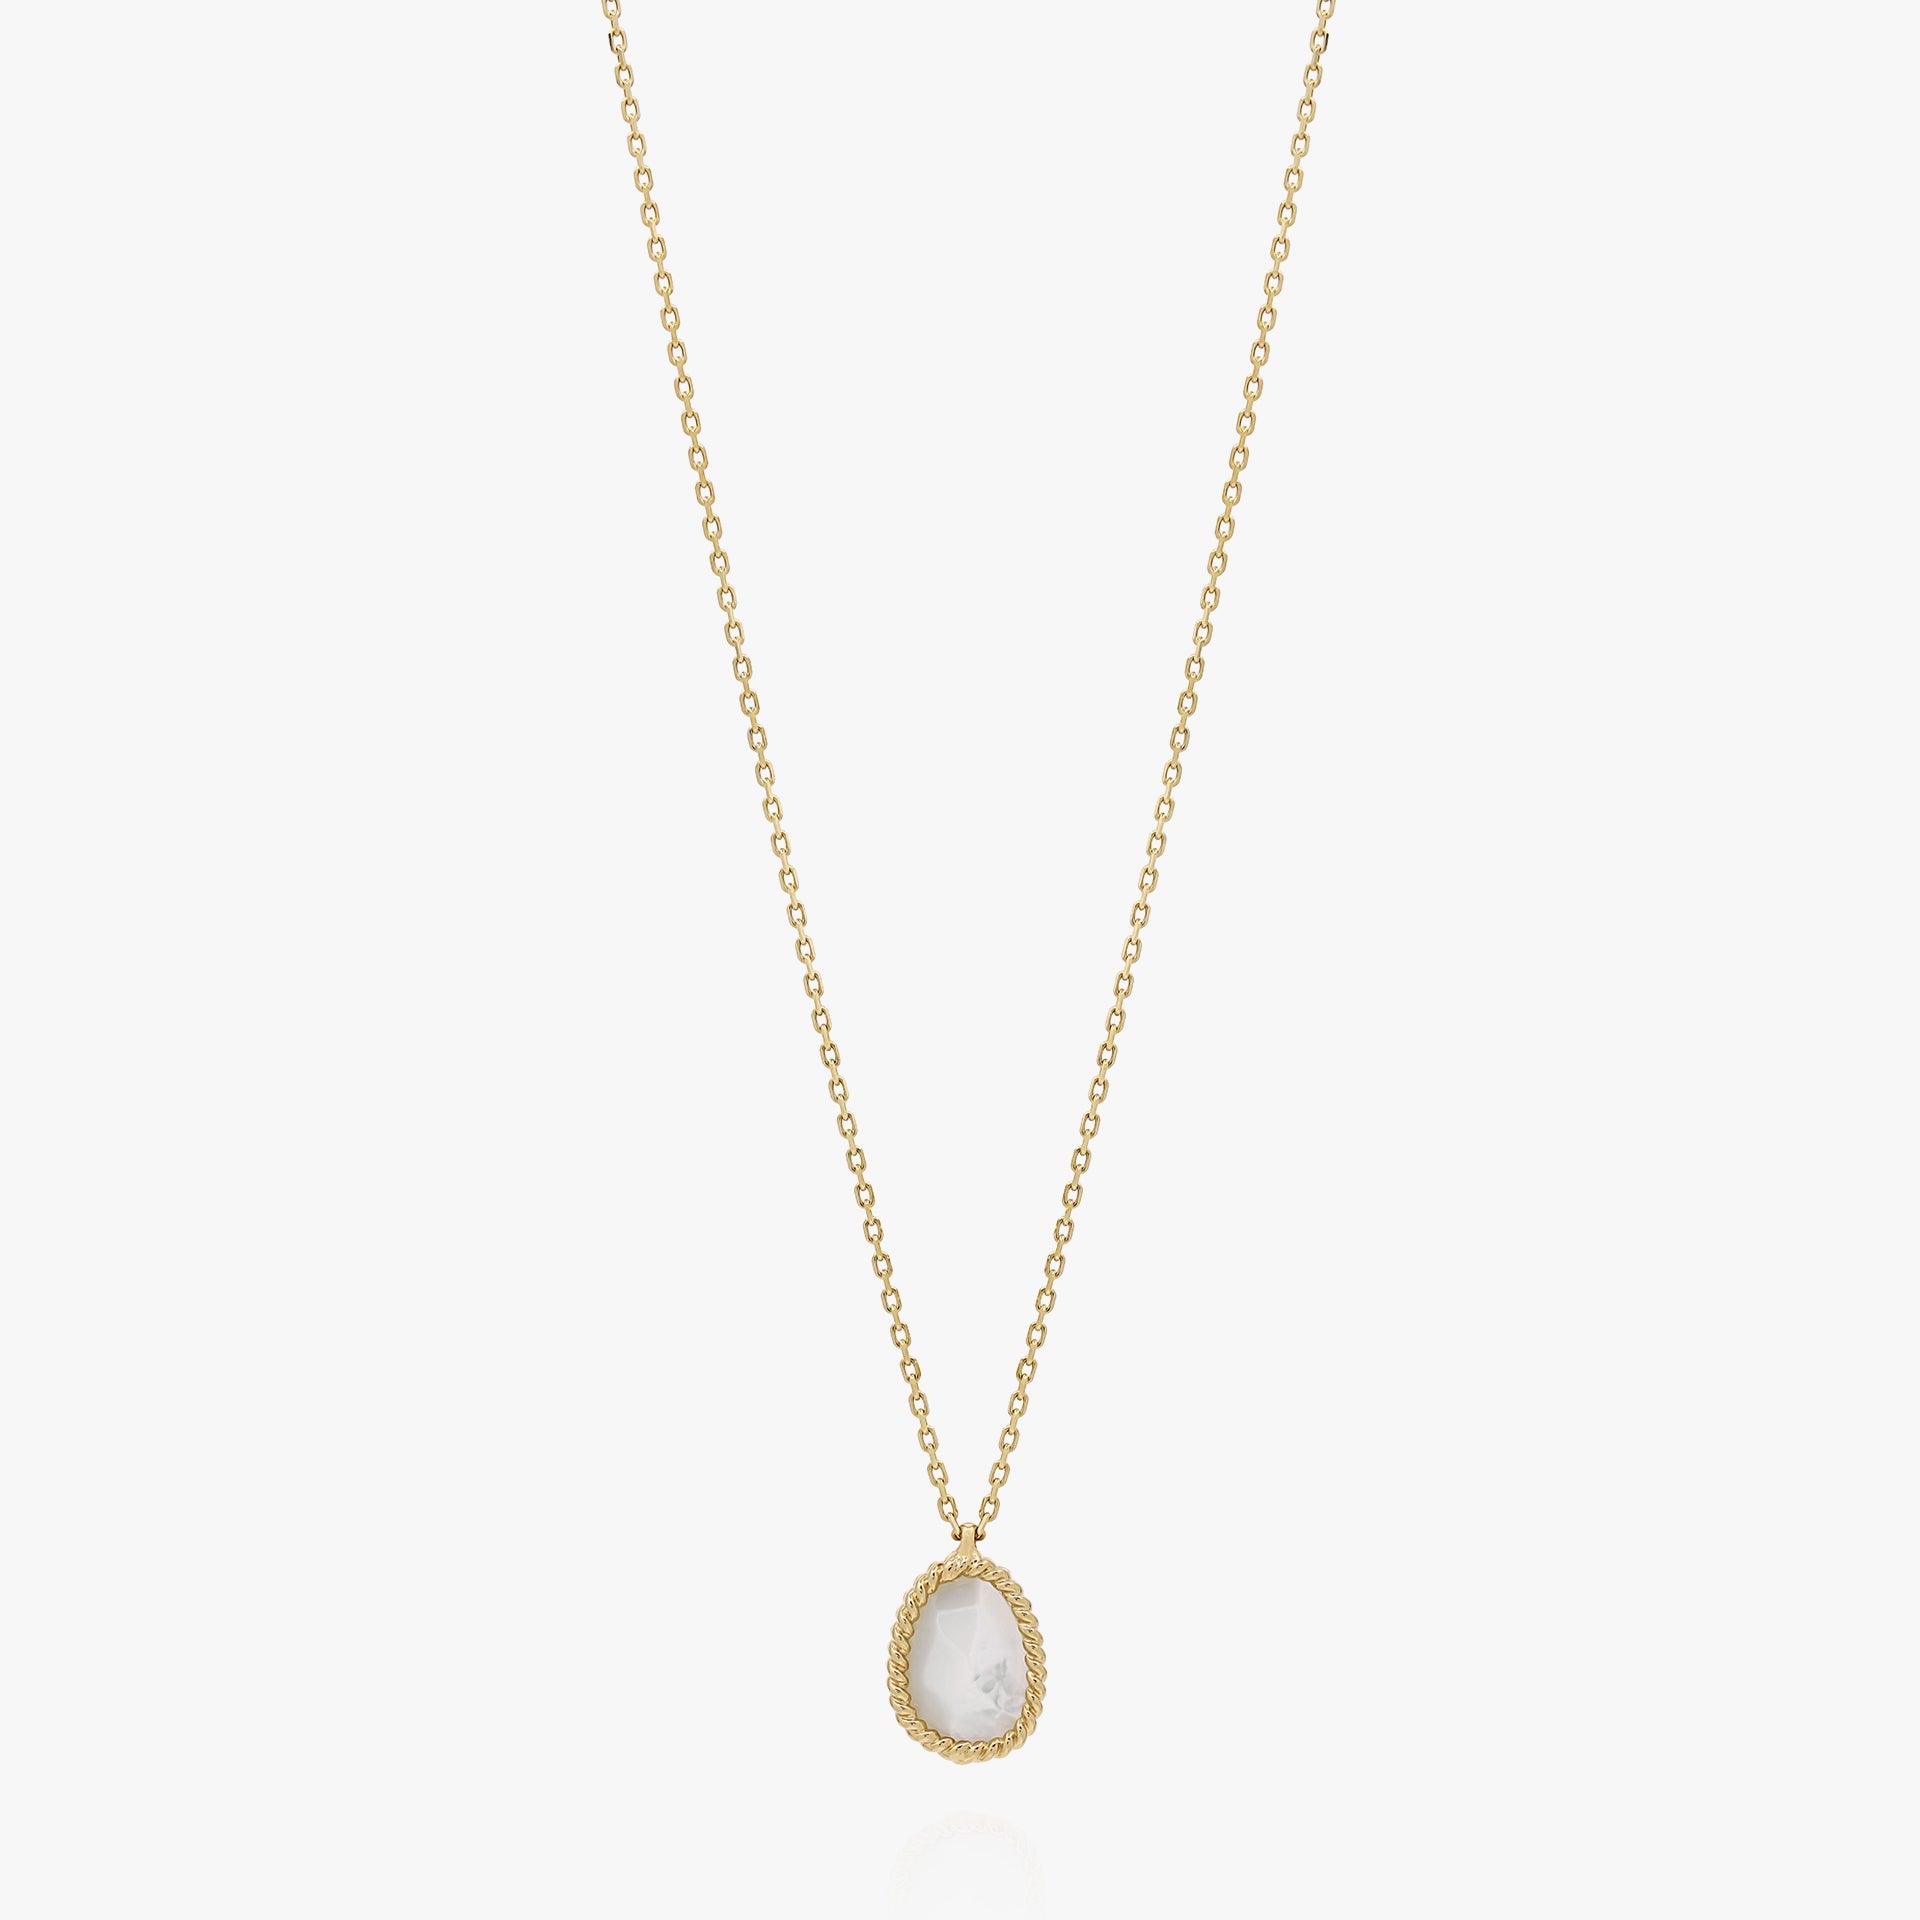 Nina Mariner Necklace In 18 Karat Yellow Gold With Large Mother Of Pearl Stone